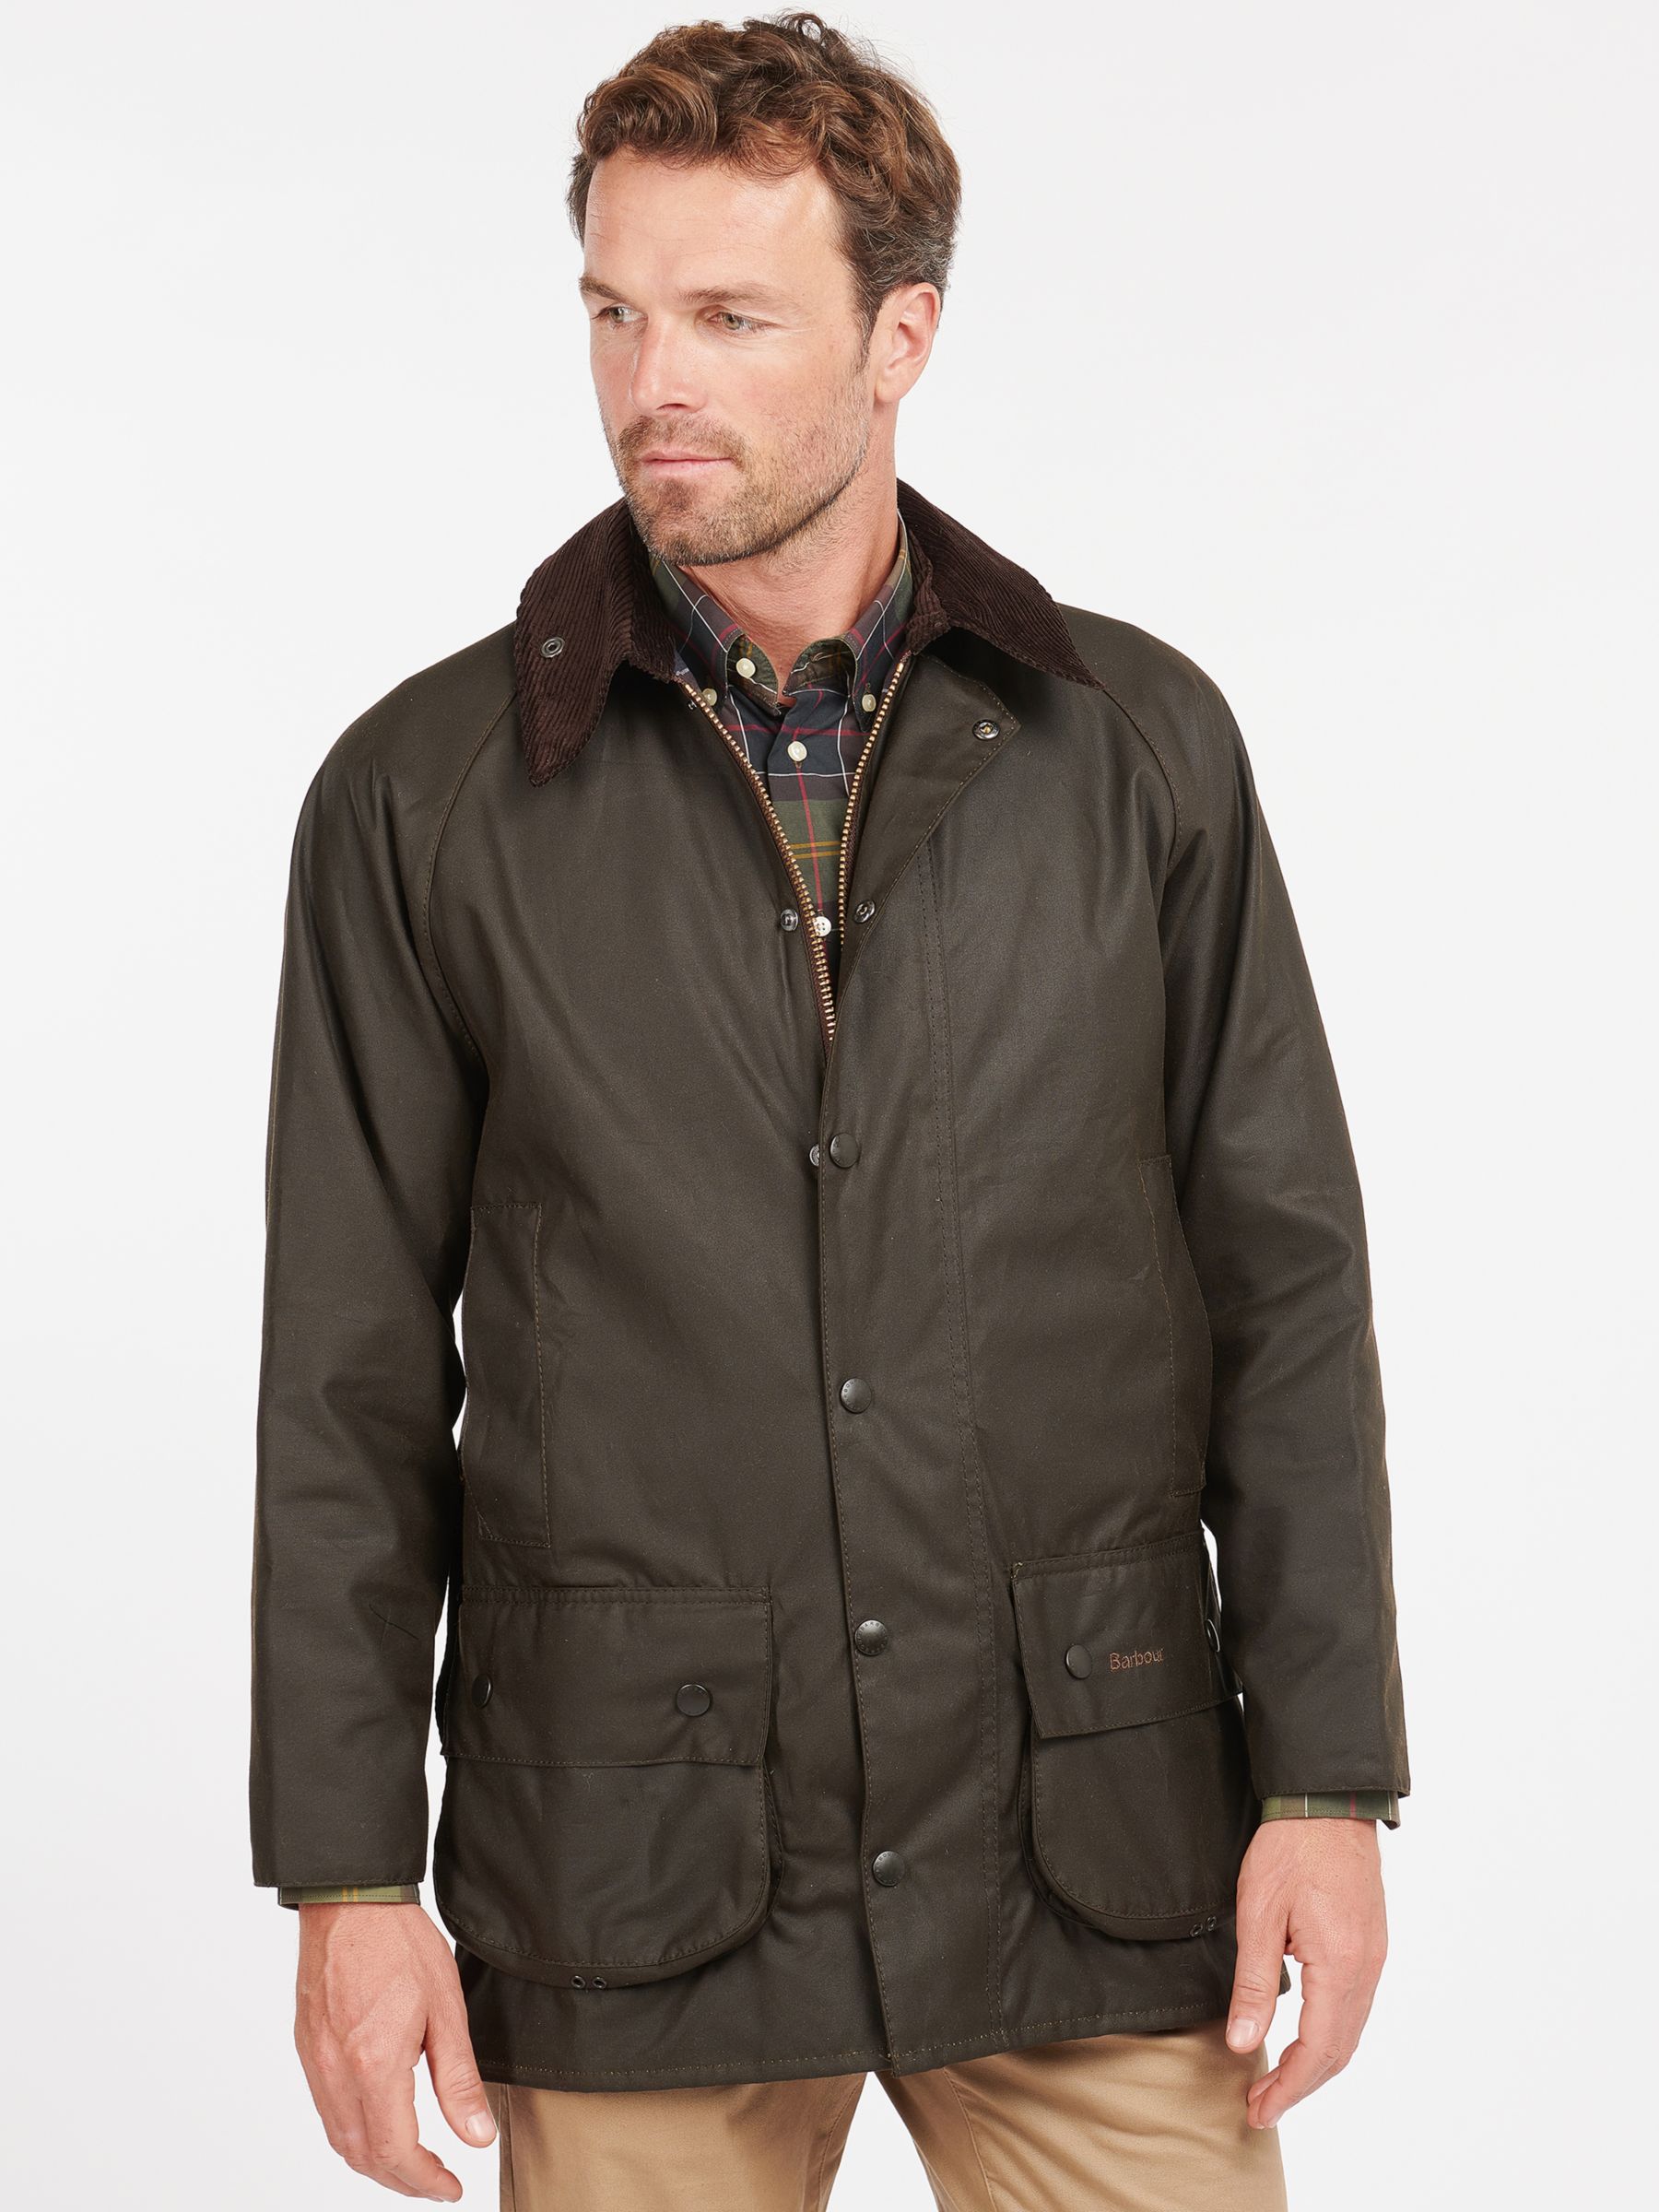 Barbour Classic Beaufort Waxed Jacket, Olive, 38R